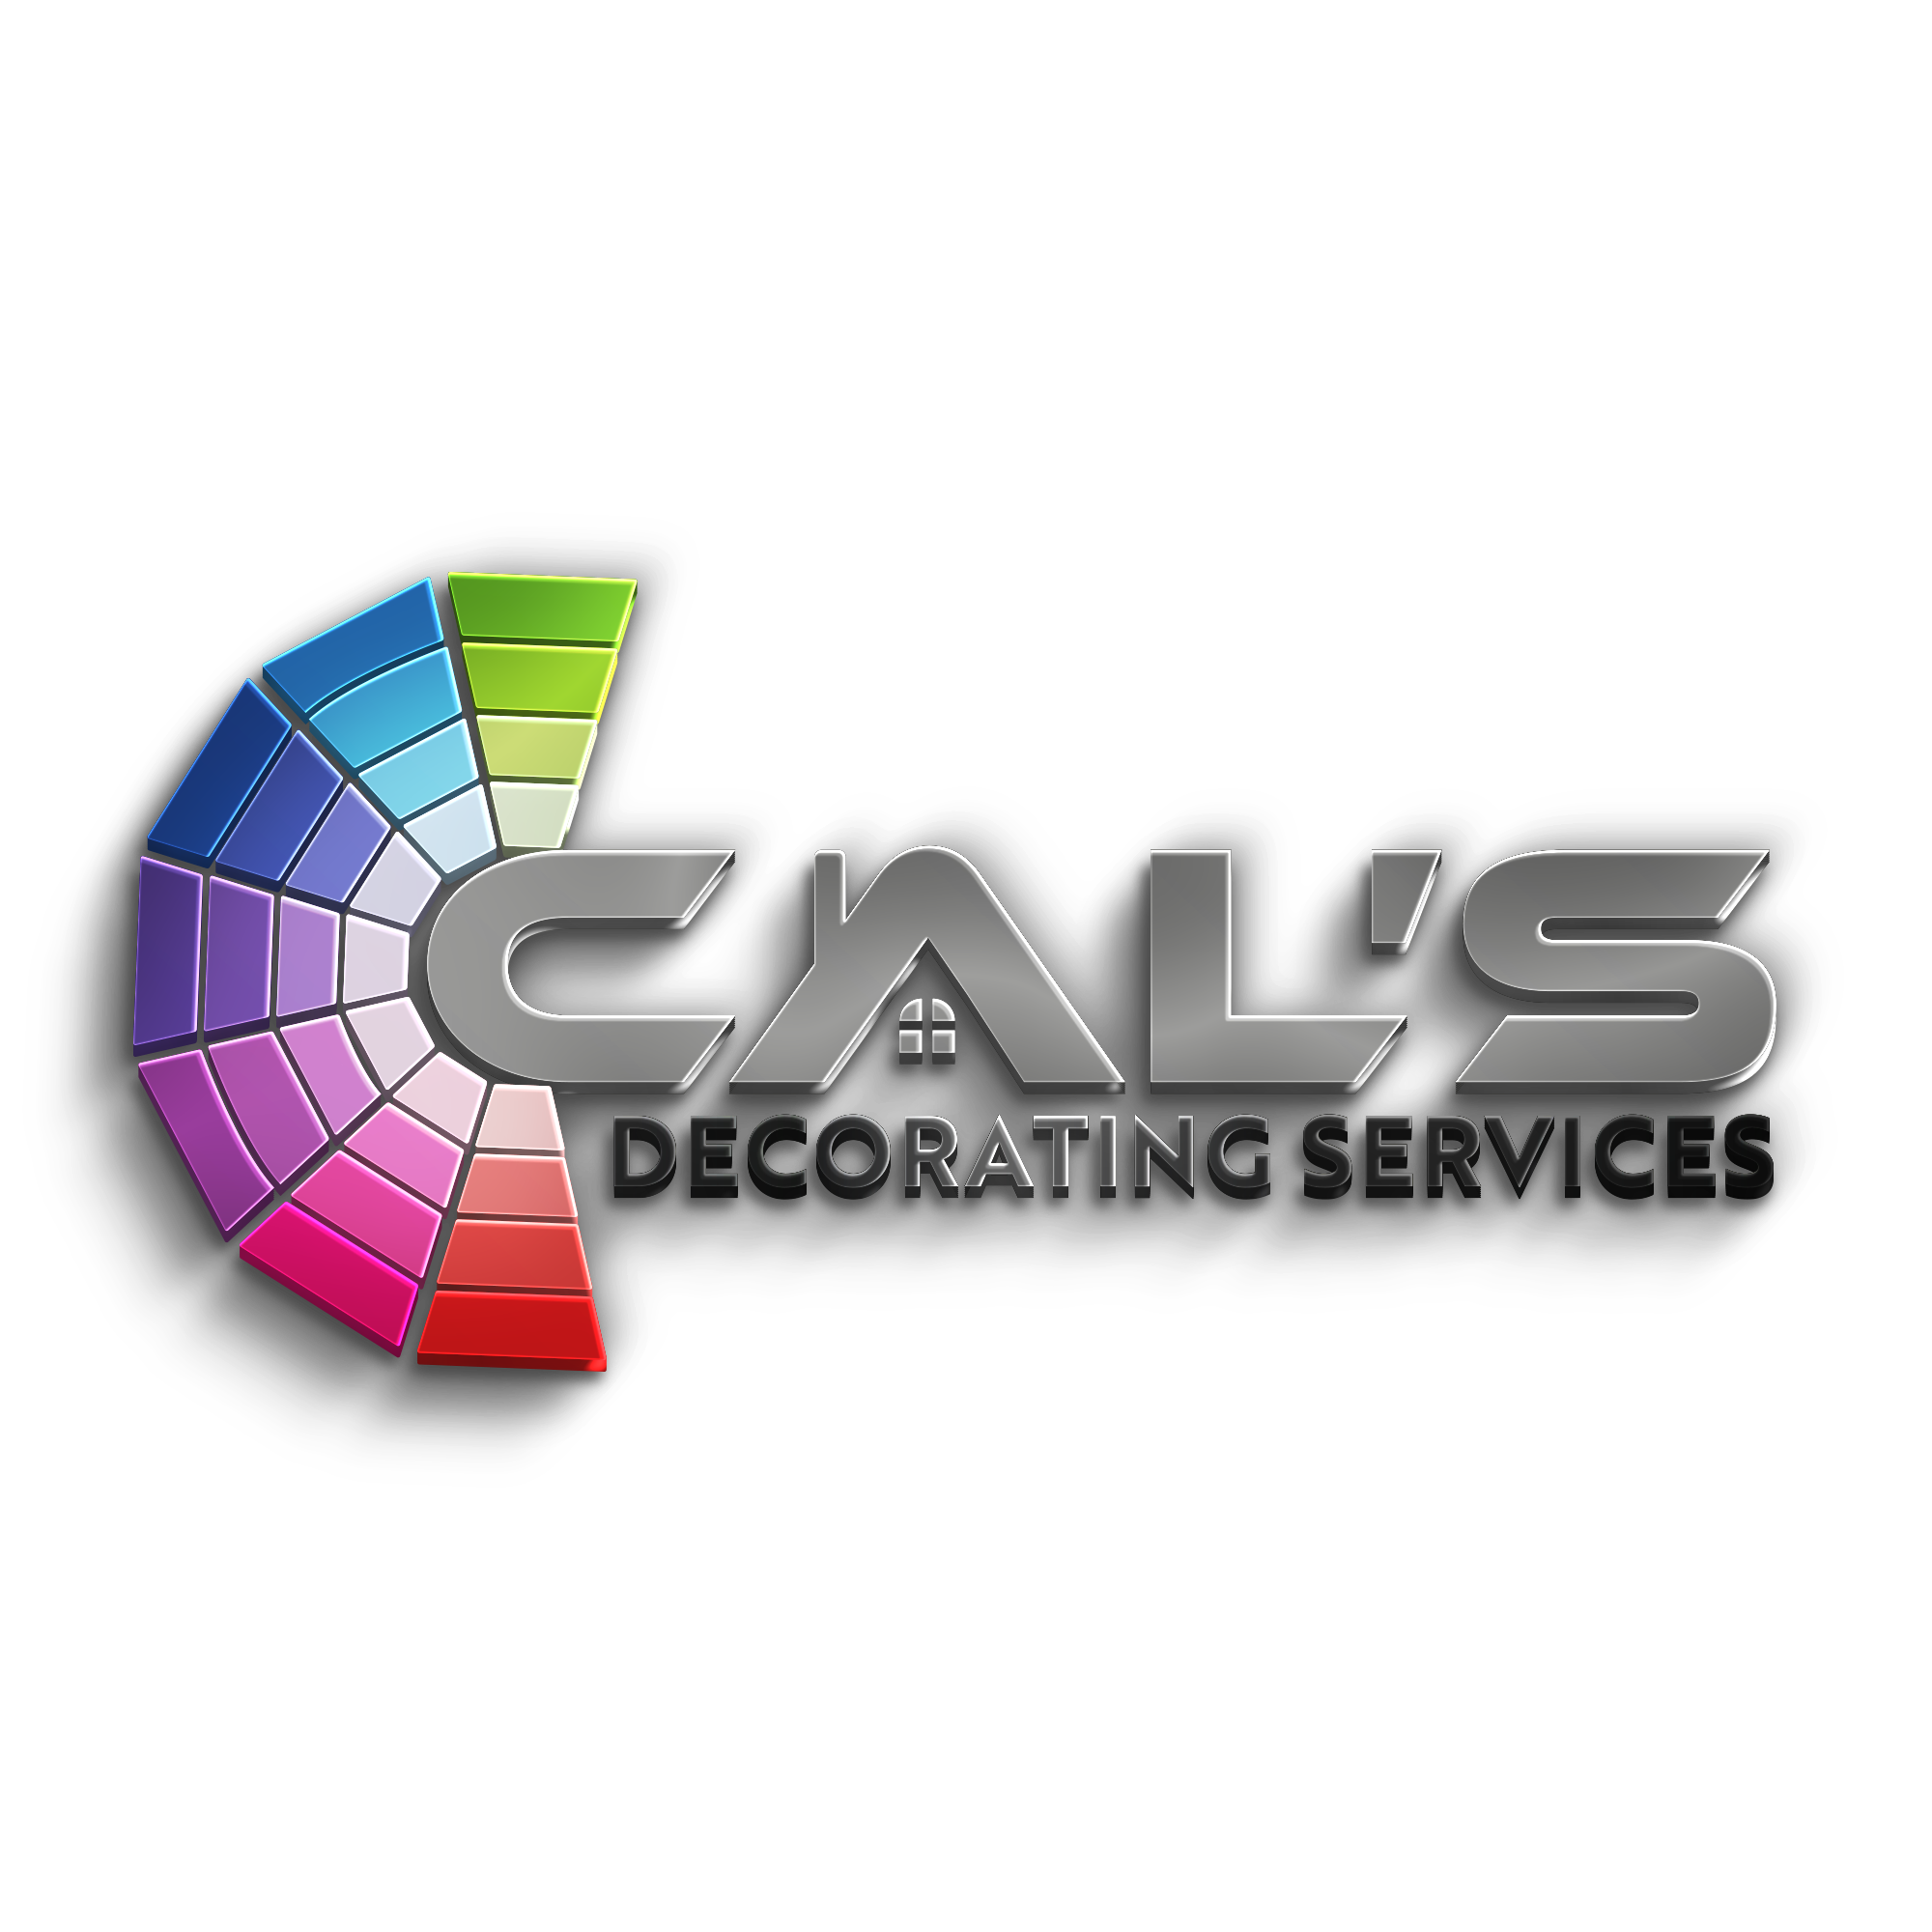 decorator north Wales painter and decorator north wales Painters Decorators north wales Decorating Services North Wales Decorators Rhos on Sea decorator llanddulas Decorators Llandudno Decorators conwy